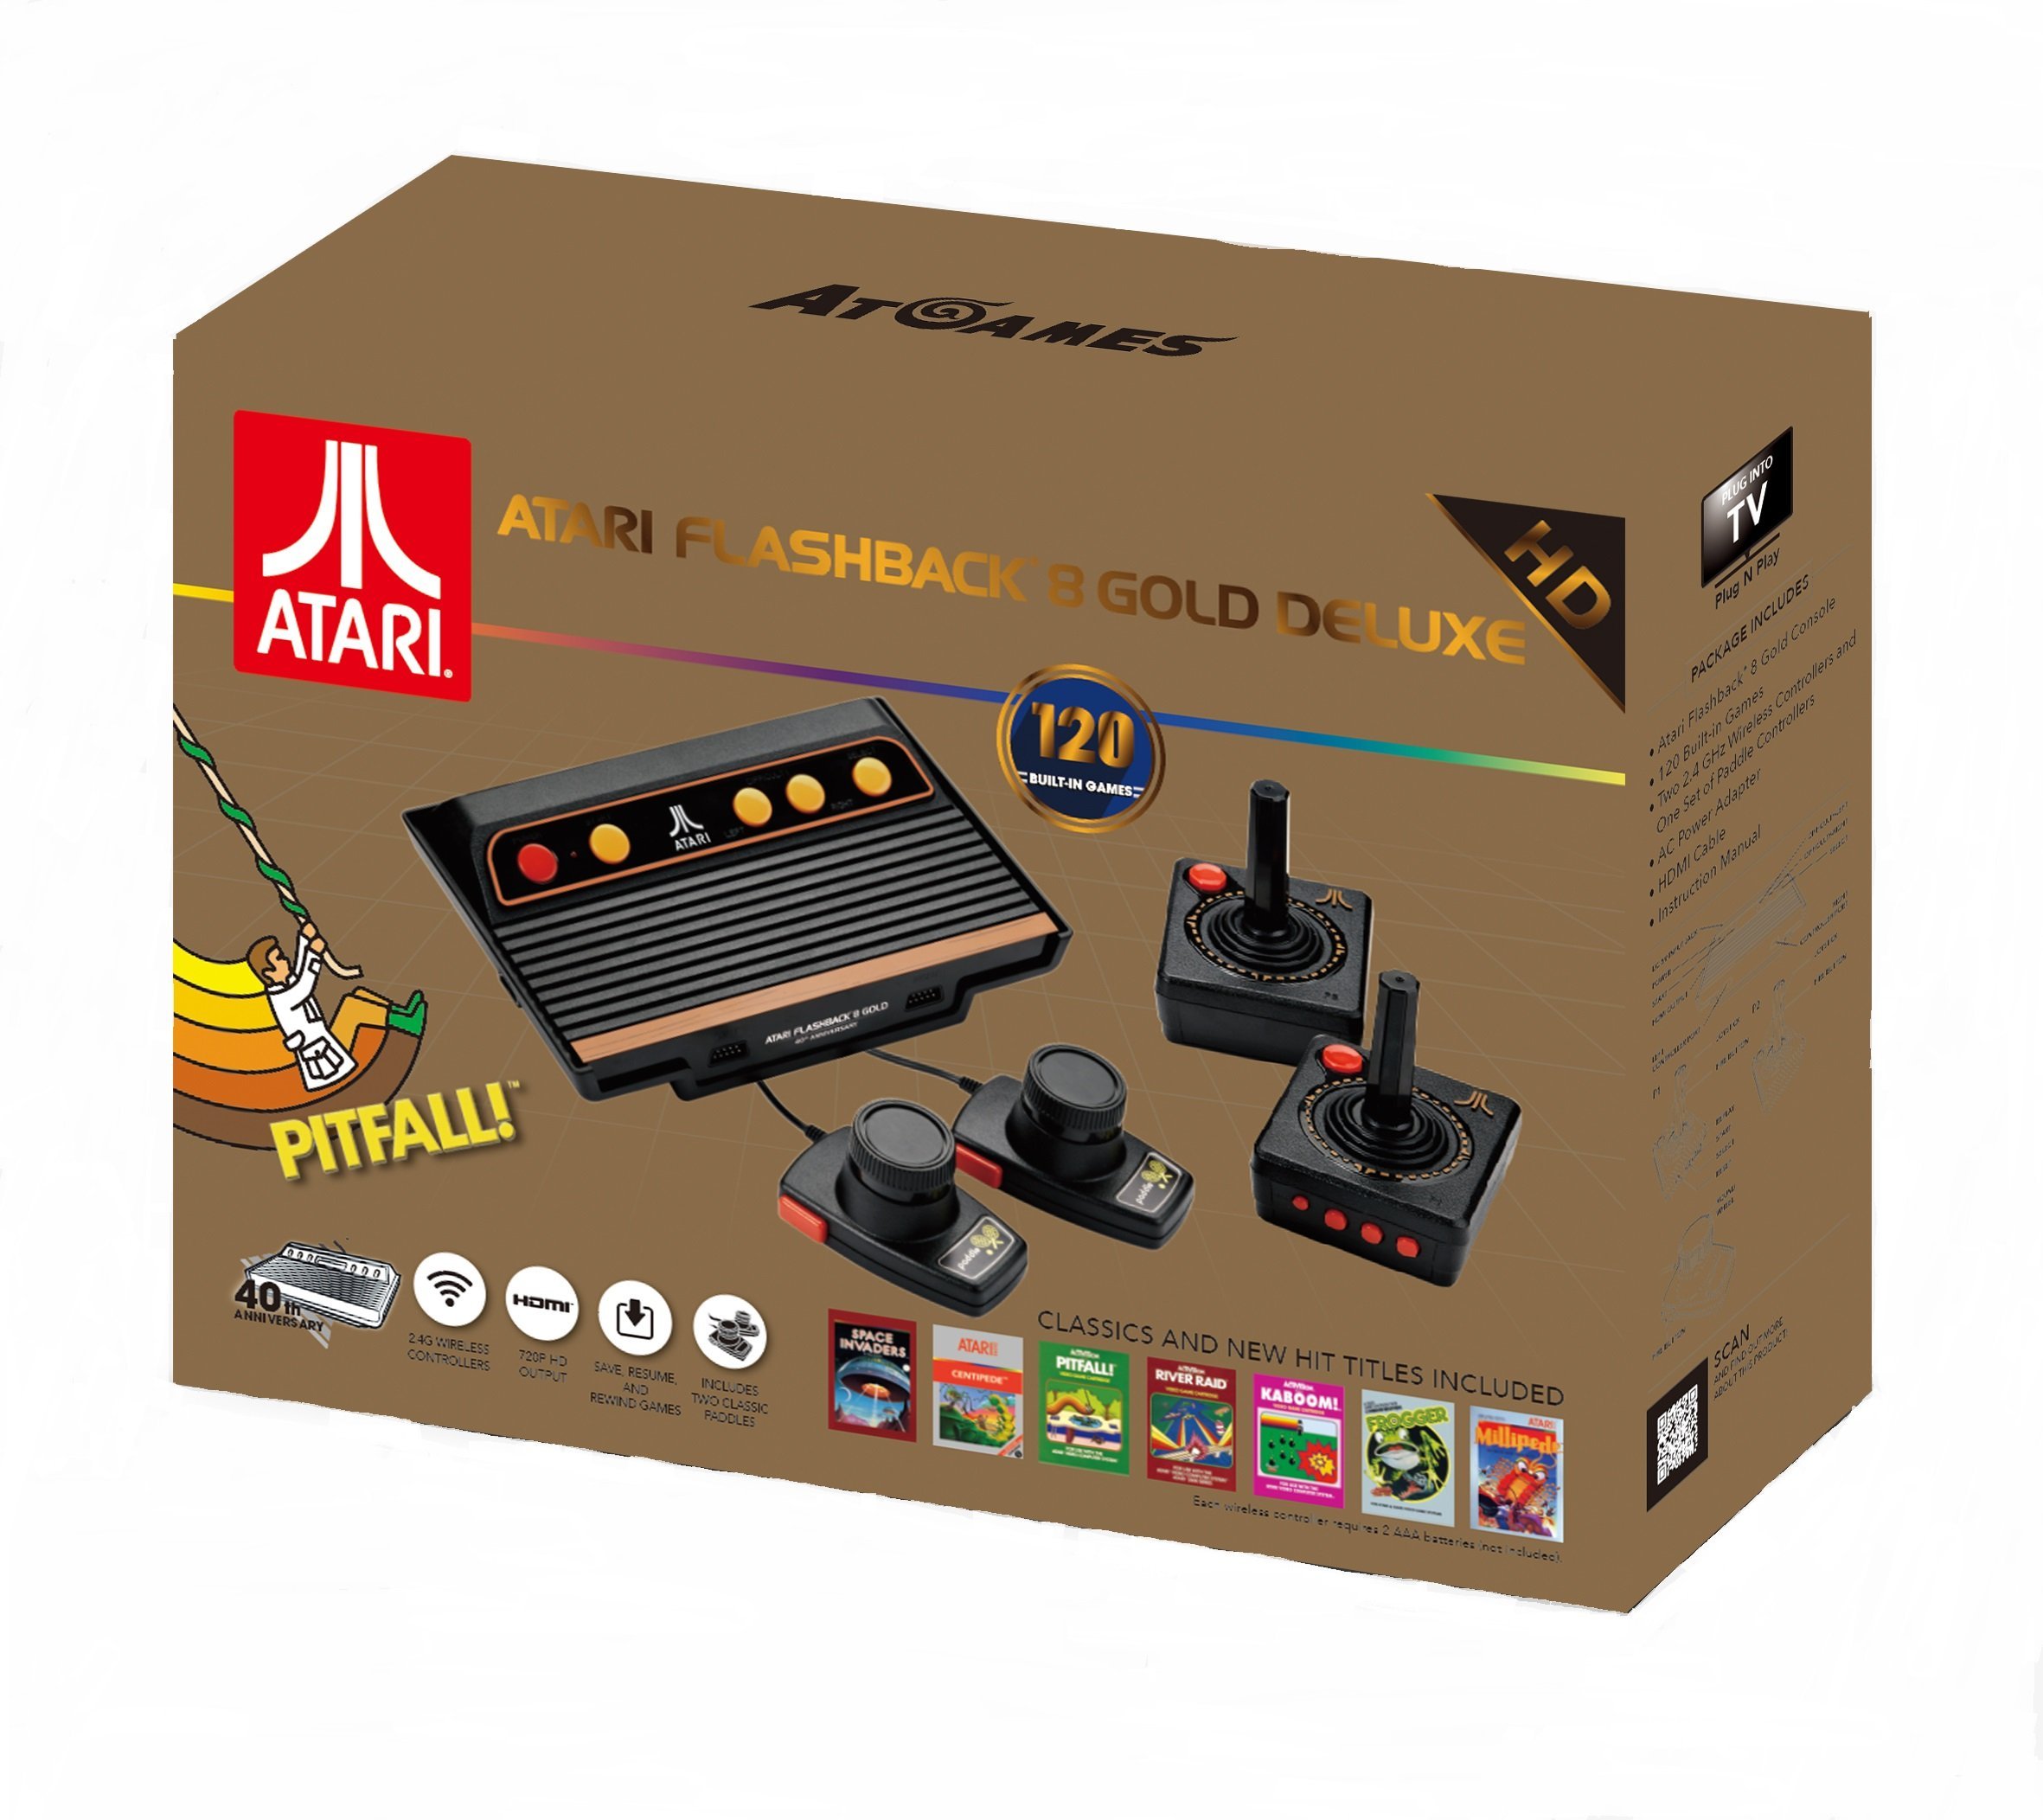 AtGames Atari Flashback 8 Gold Deluxe with 120 Games - Includes 2 Controllers and 2 Paddles - image 1 of 3